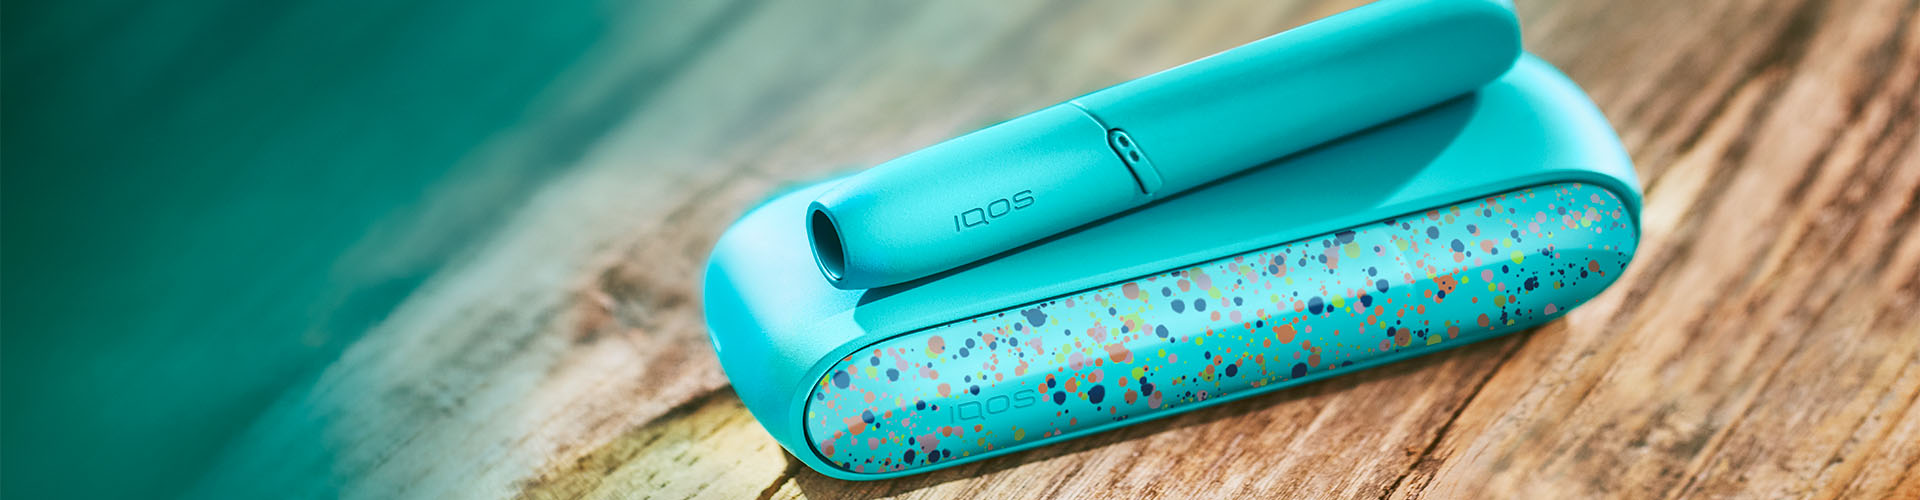 New Limited Edition IQOS 3 DUO WE | IQOS Portugal News